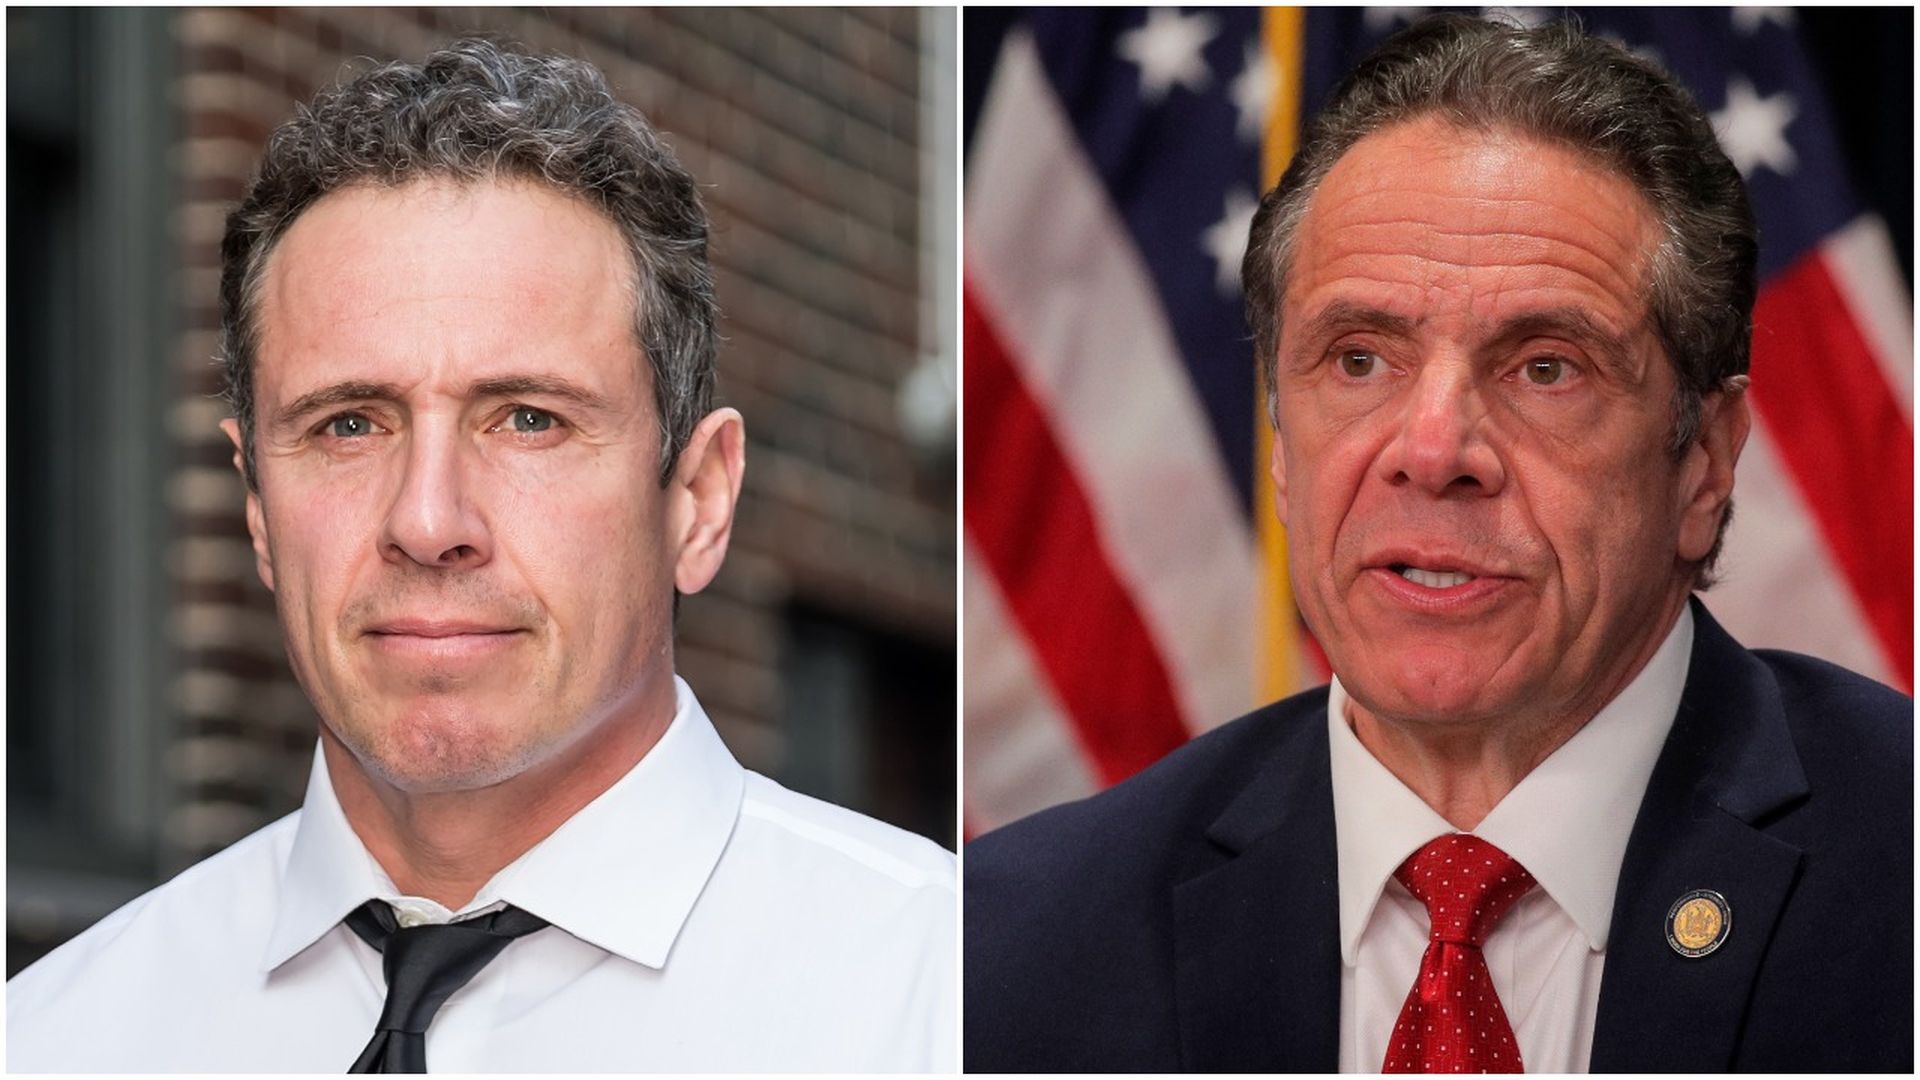 Combination images of CNN anchor Chris Cuomo and his older brother, New York Gov. Andrew Cuomo